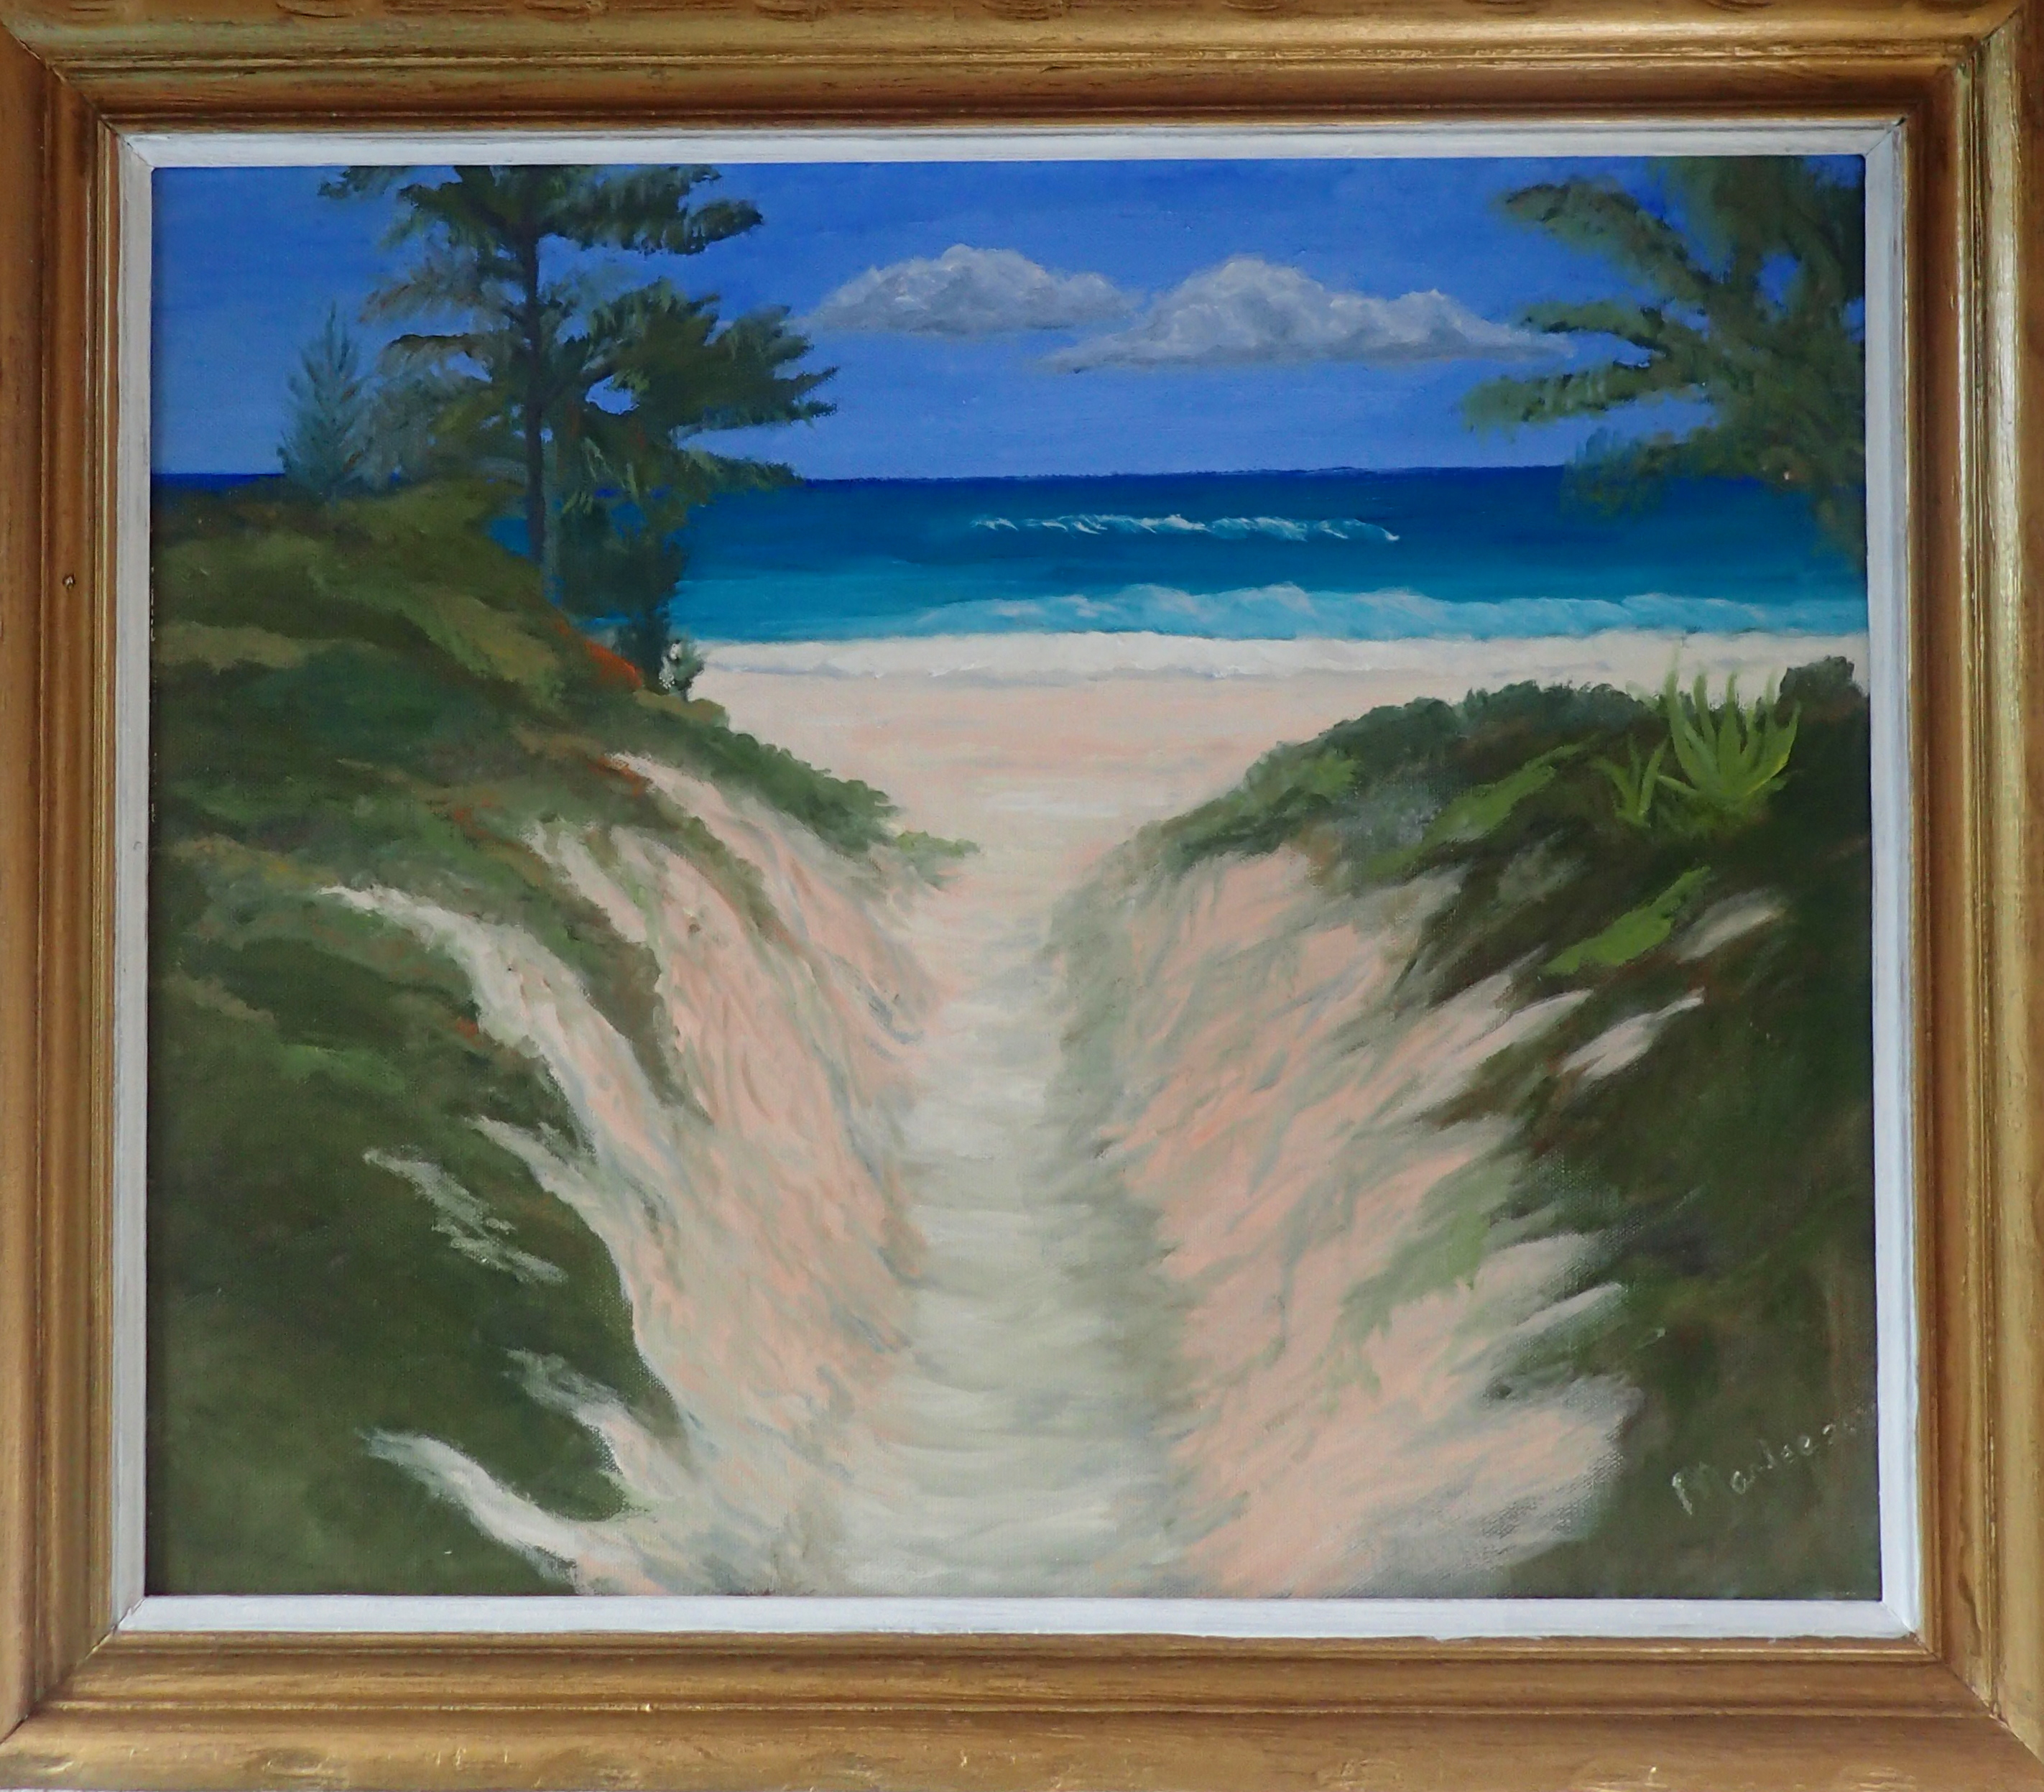 Original Oil on Canvas 18x22"   The beautiful Atlantic Ocean in Abaco Bahamas is hidden until you walk through the dune.   The blessing of this first view is immediate.  